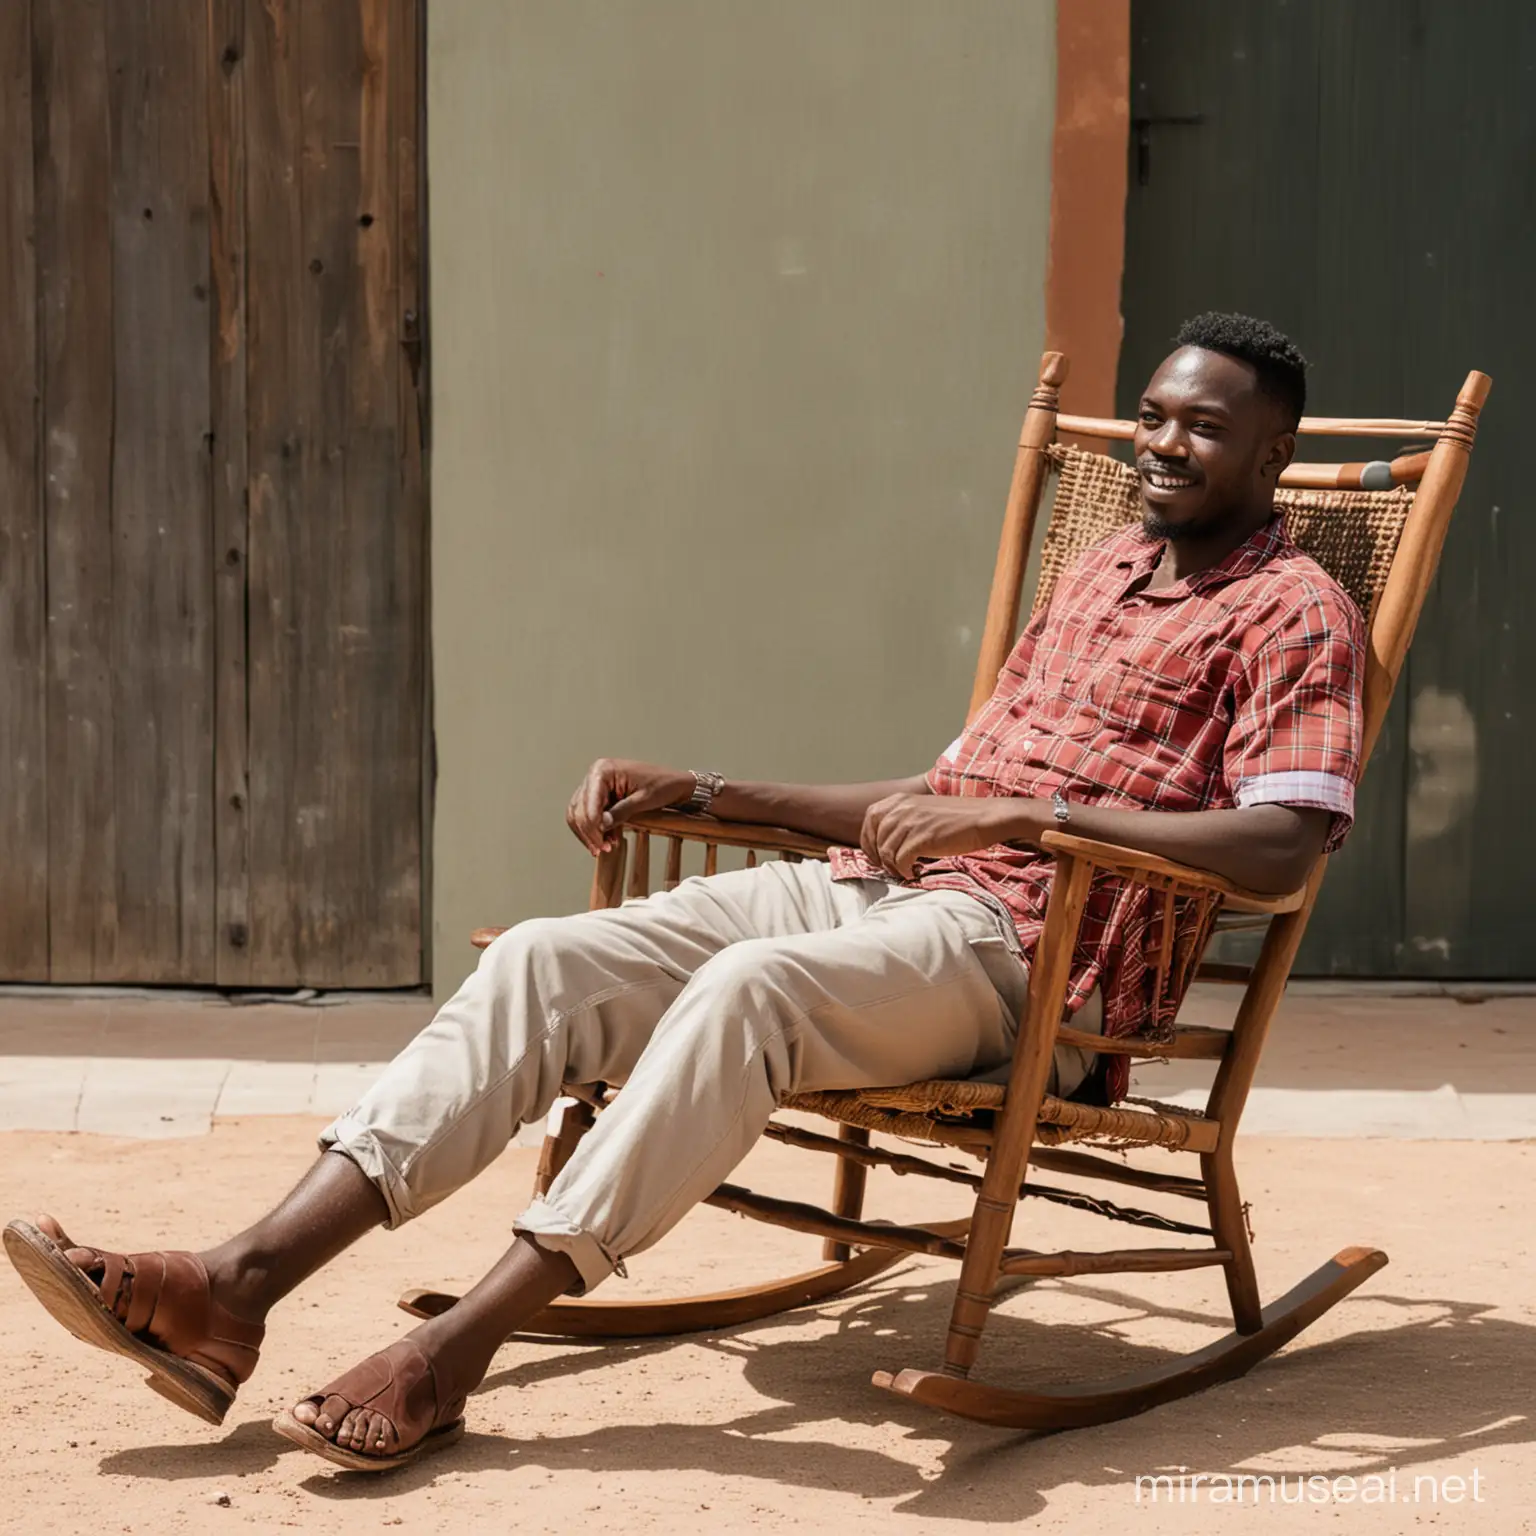 An African man chilling on a rocking chair